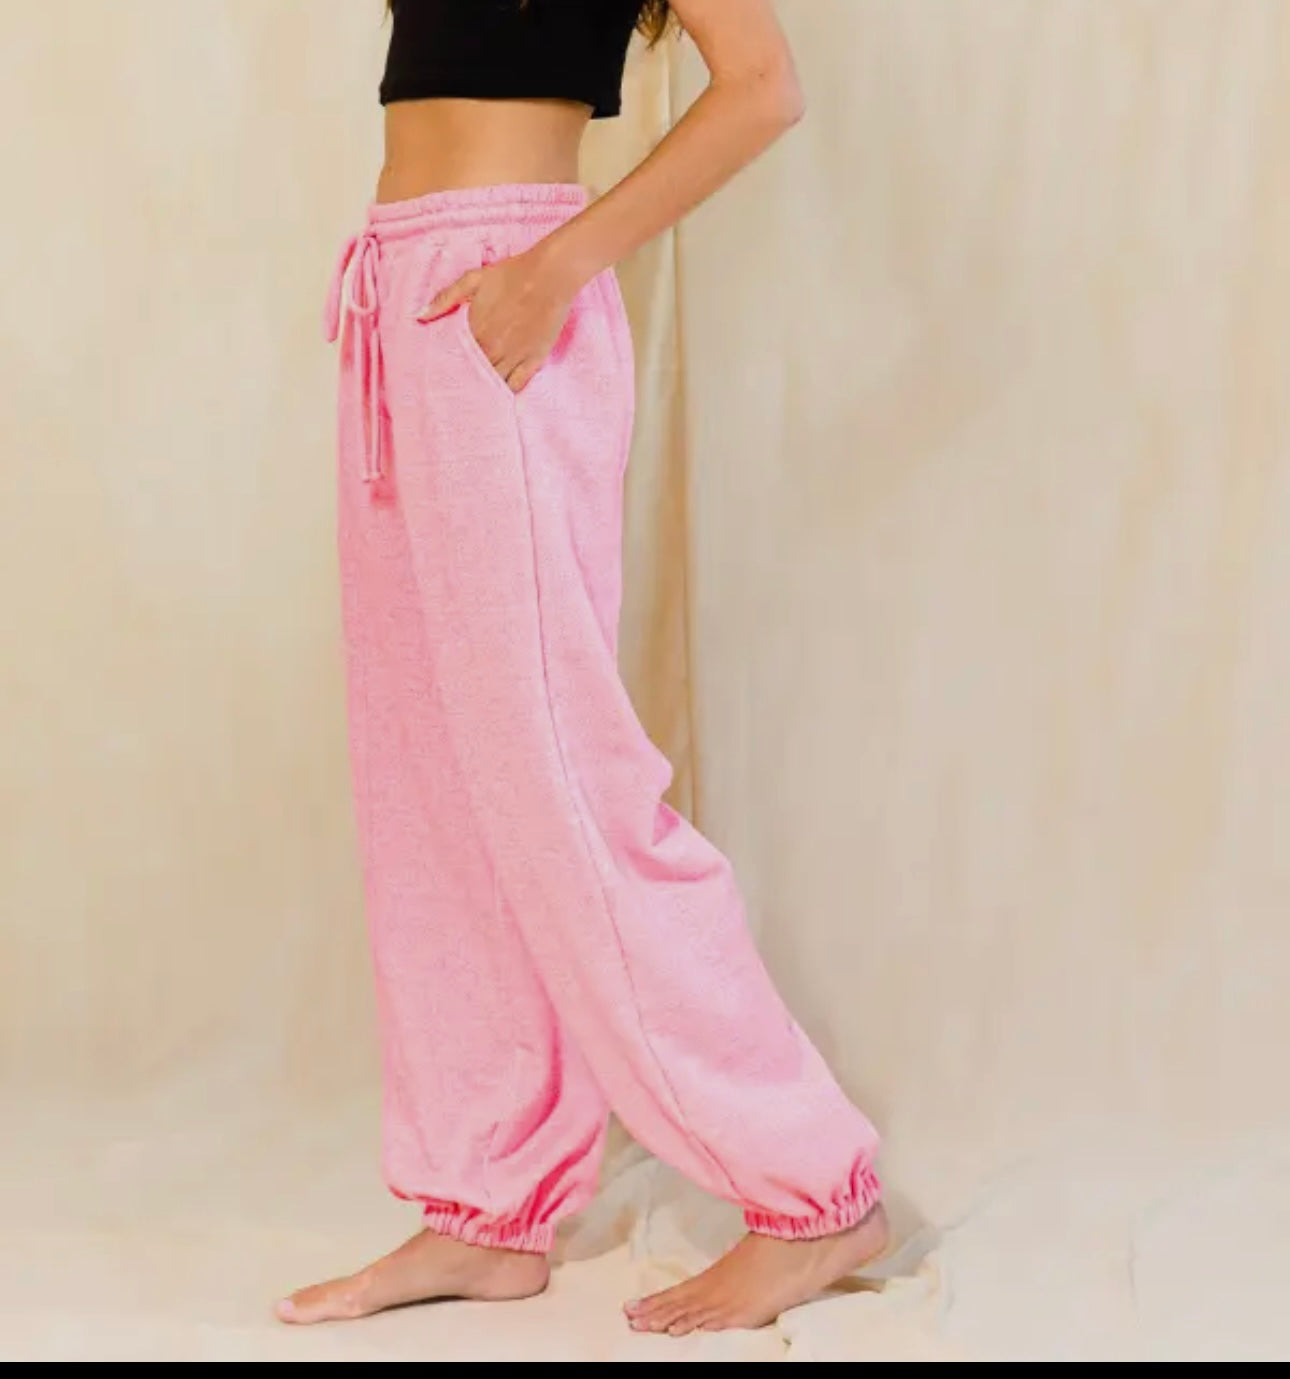 Neon Pink Joggers